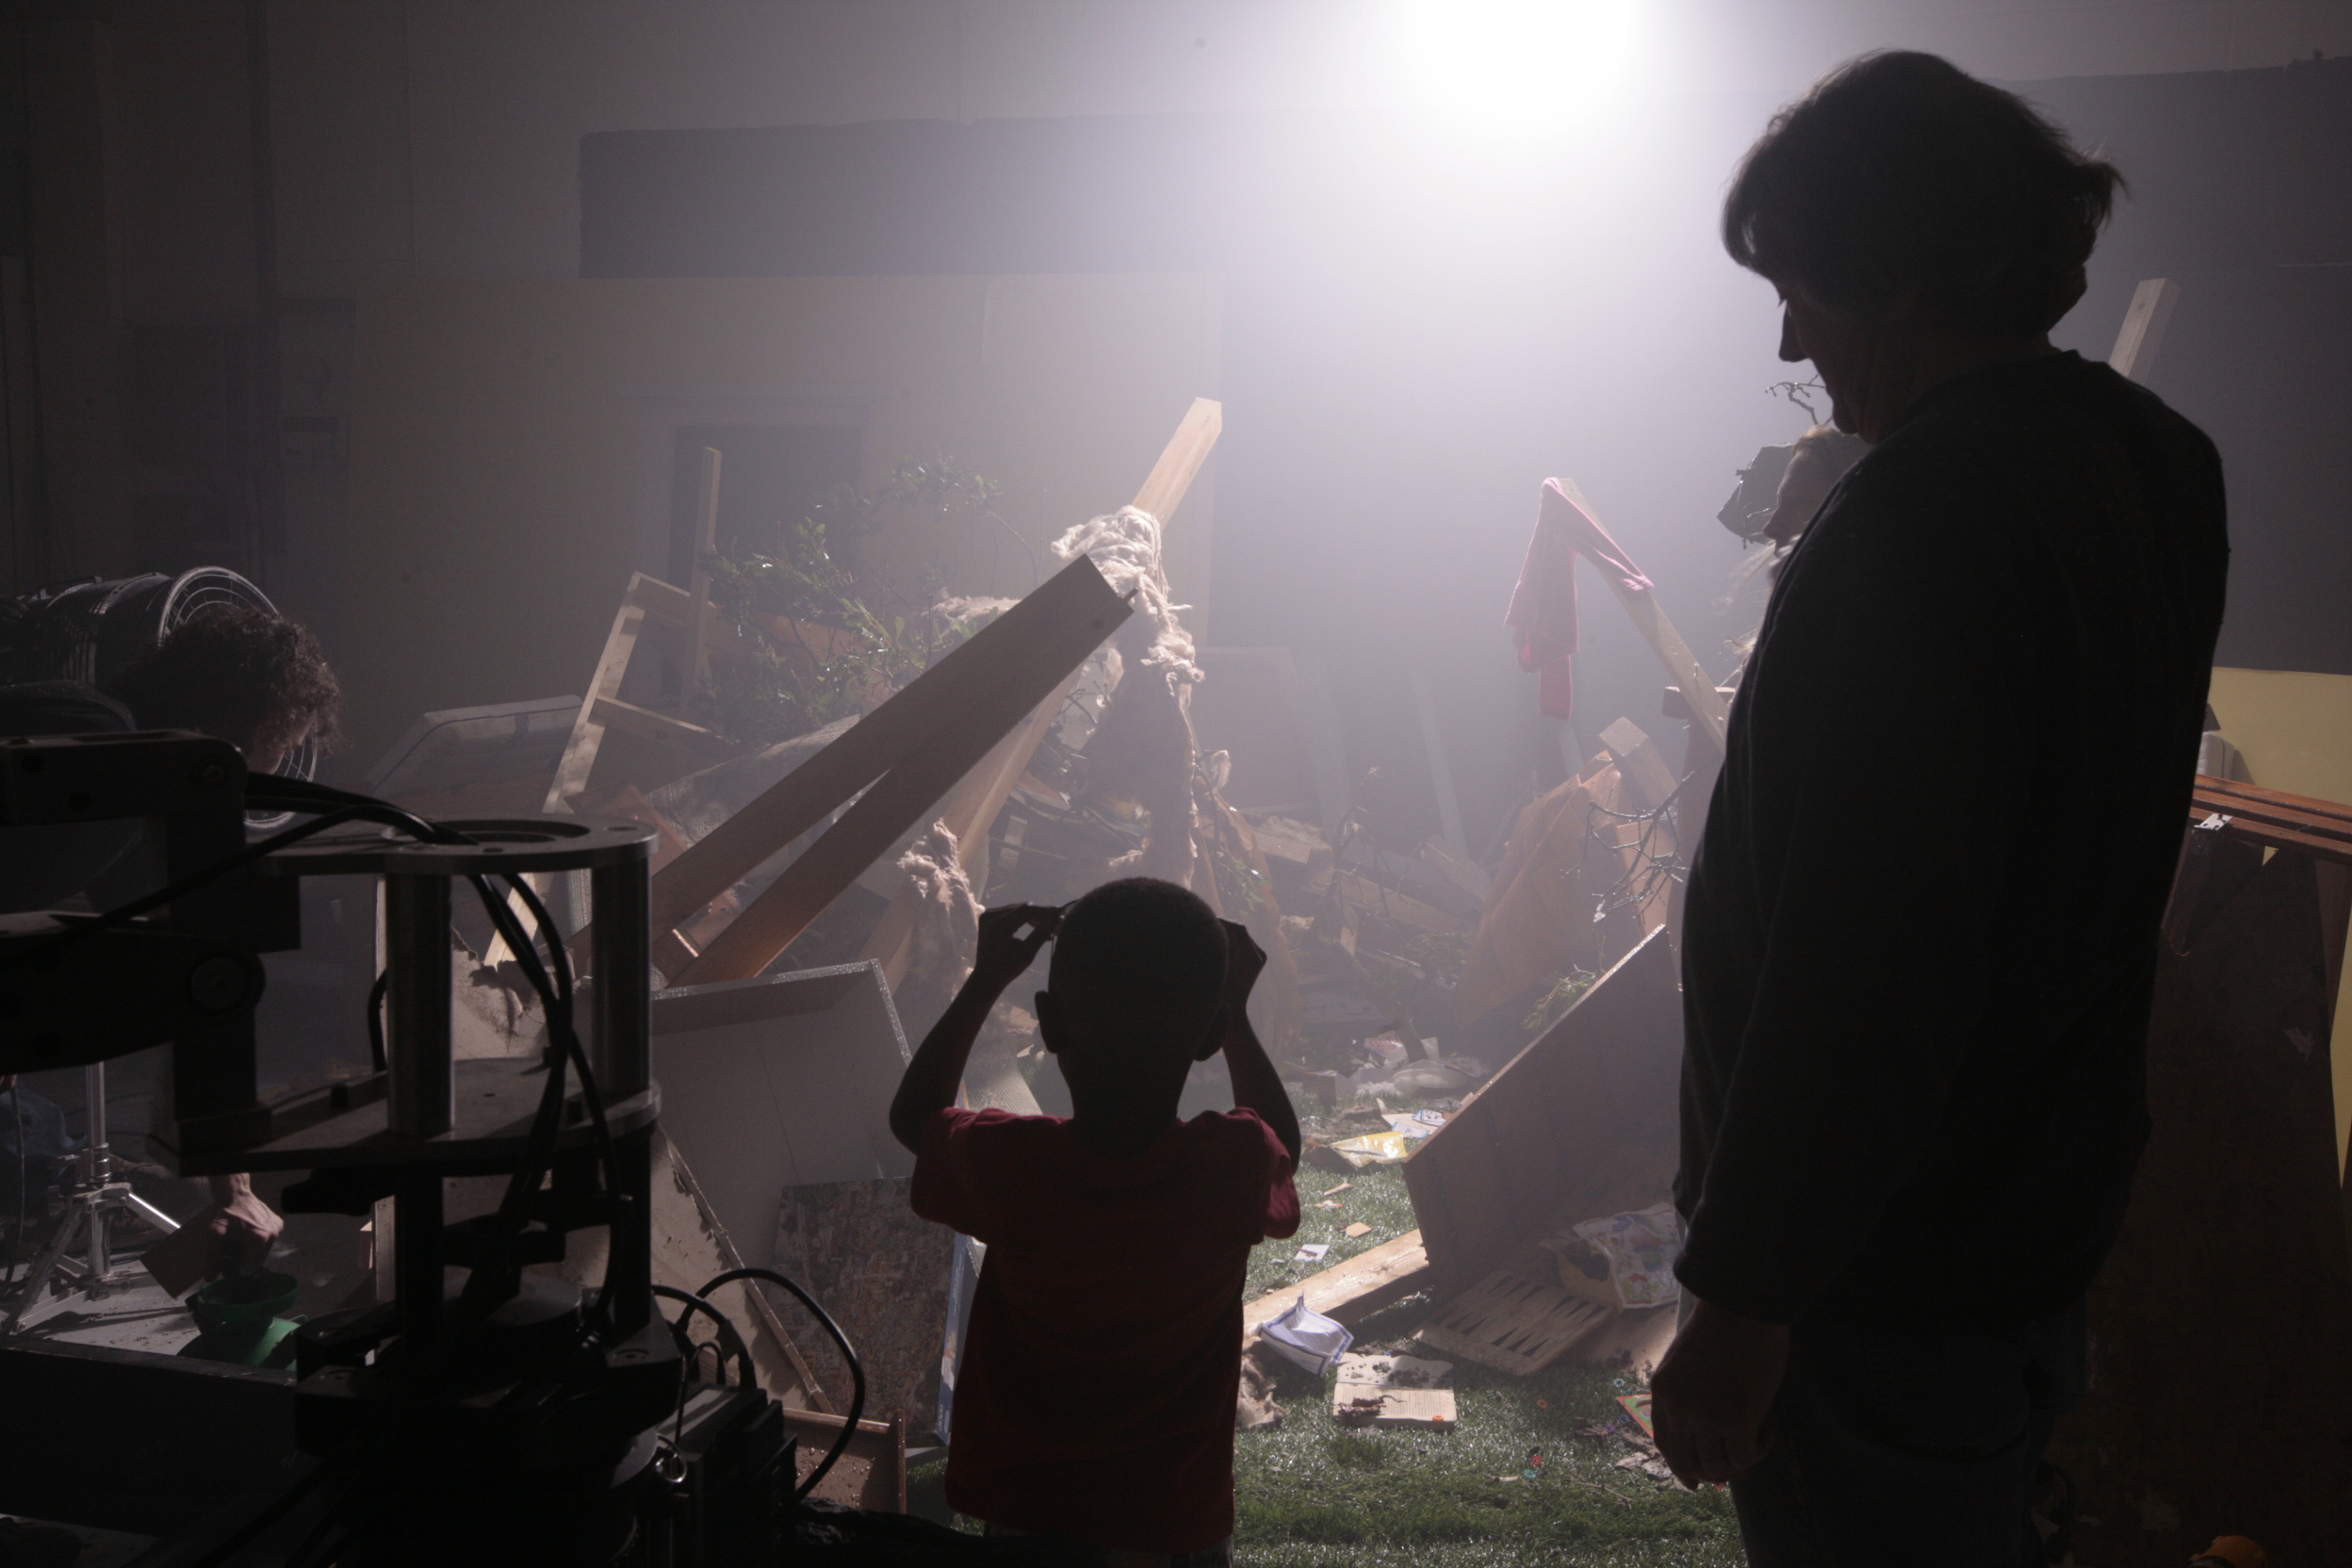 Storm City 3D. Discussing a scene of devastation with the young star.